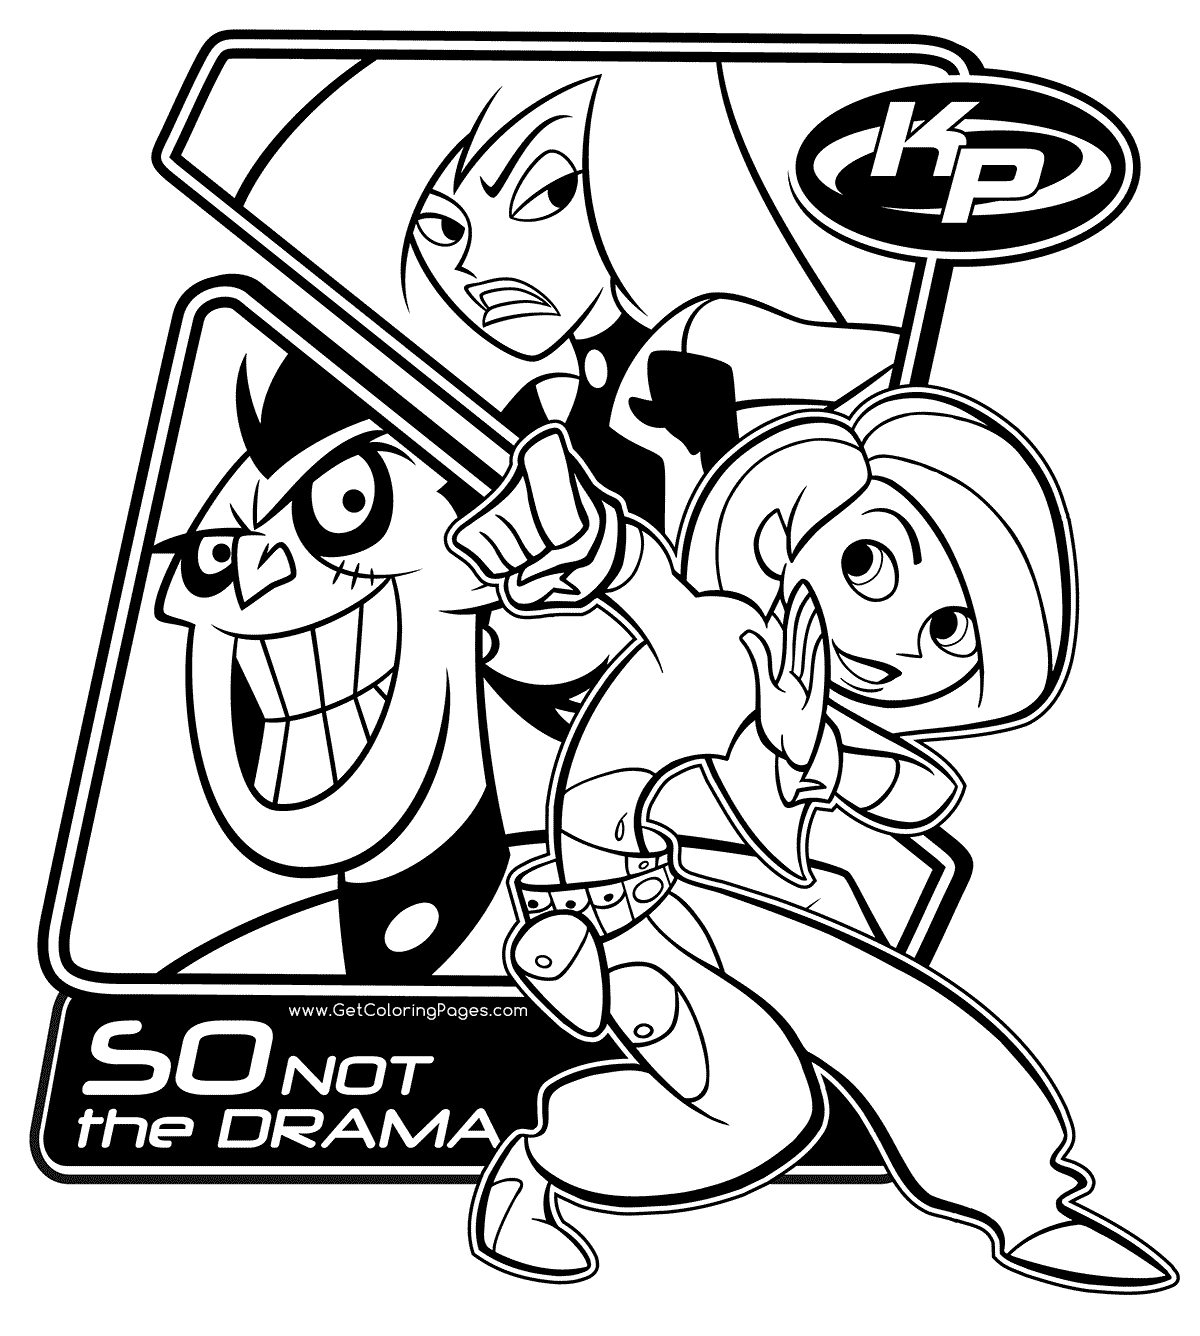 Kim with Dr. Drakken and Shego Coloring Page